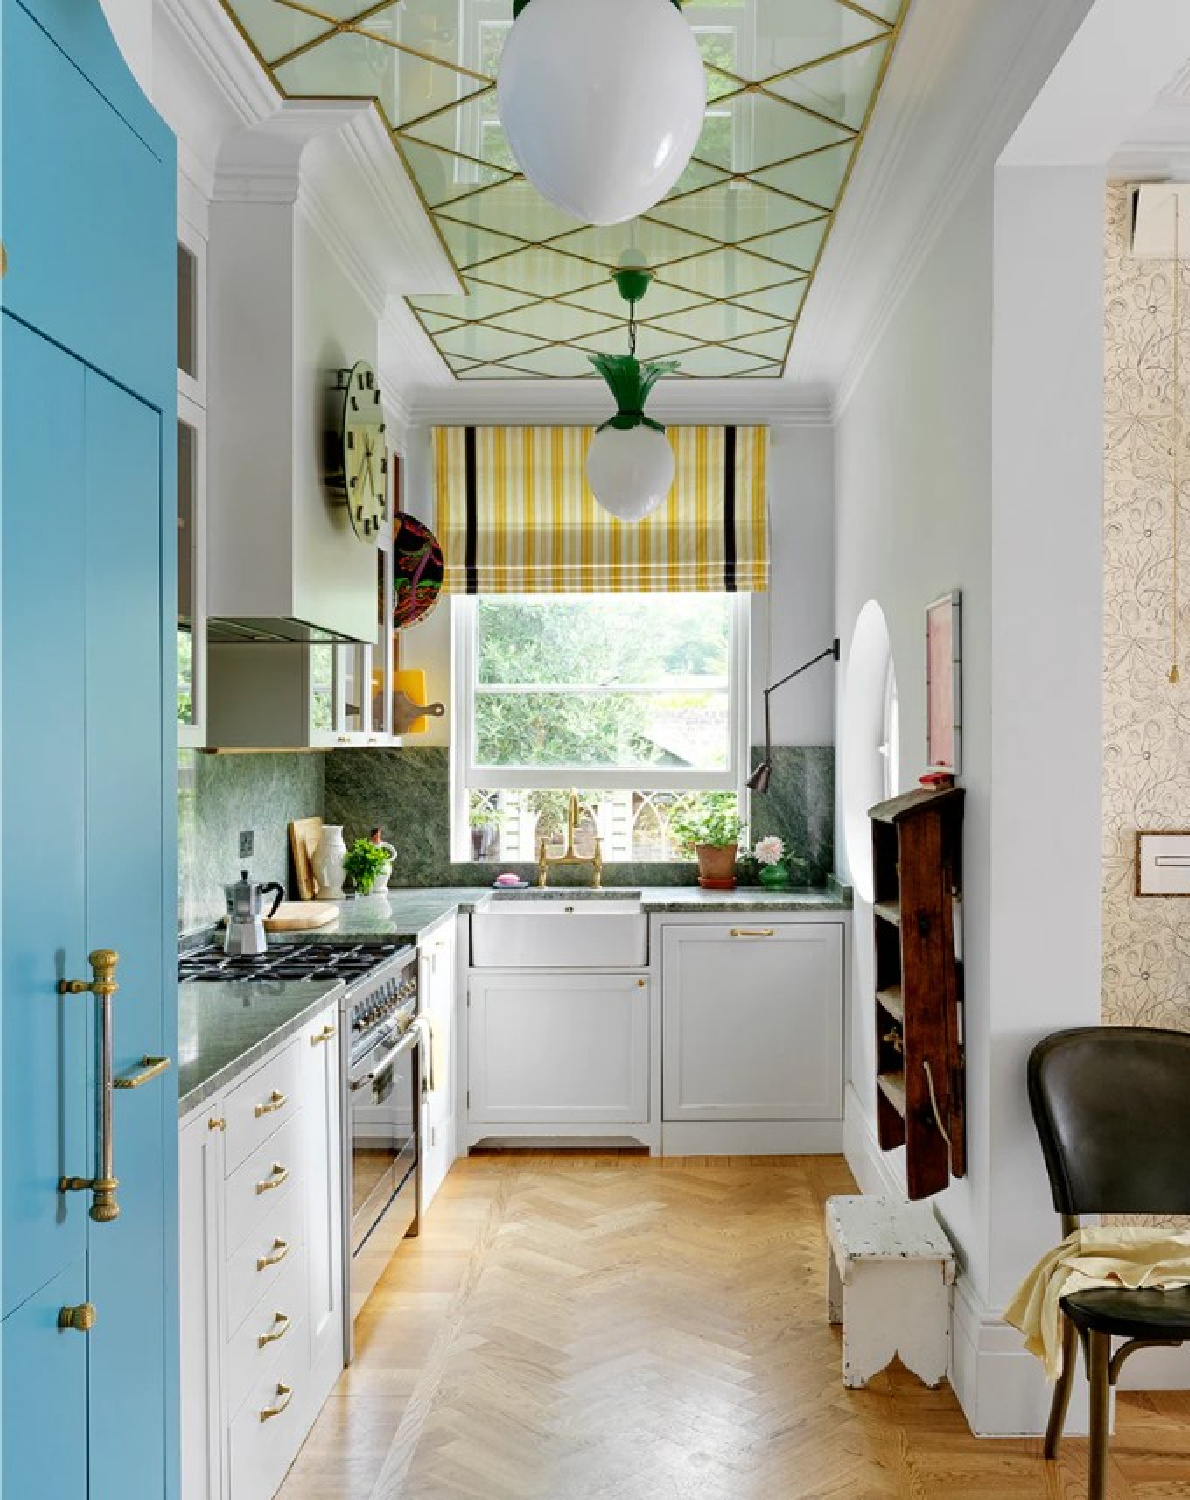 Beata Heuman designed kitchen in her UK riverside home with unique reflective ceiling detail and cheery blue paneled frig. Photo: Simon Brown.